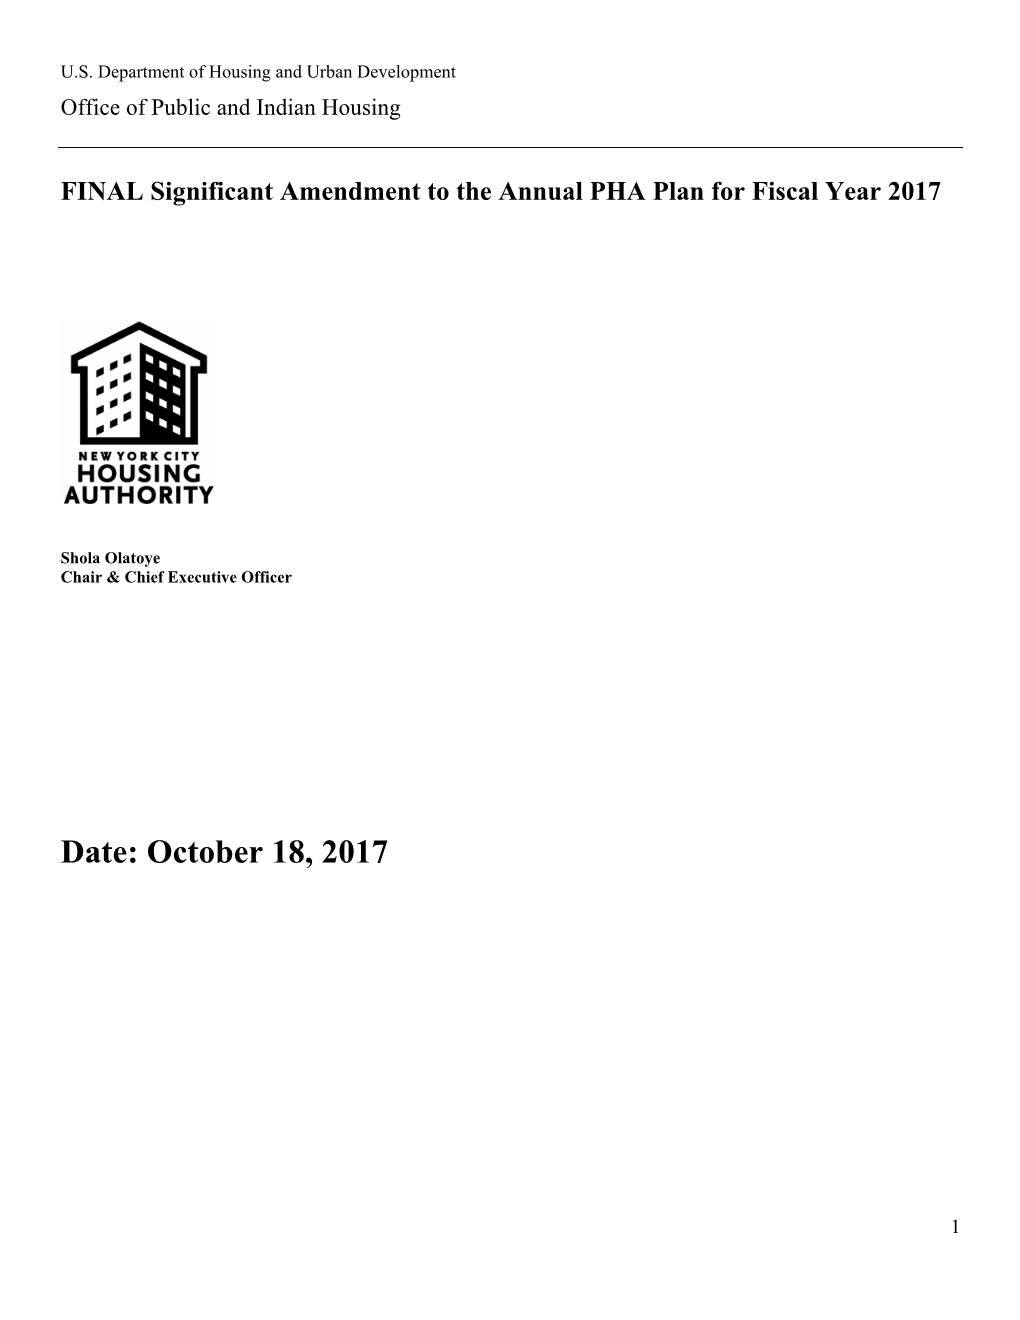 Amendment to the Annual Plan for Fiscal Year 2017